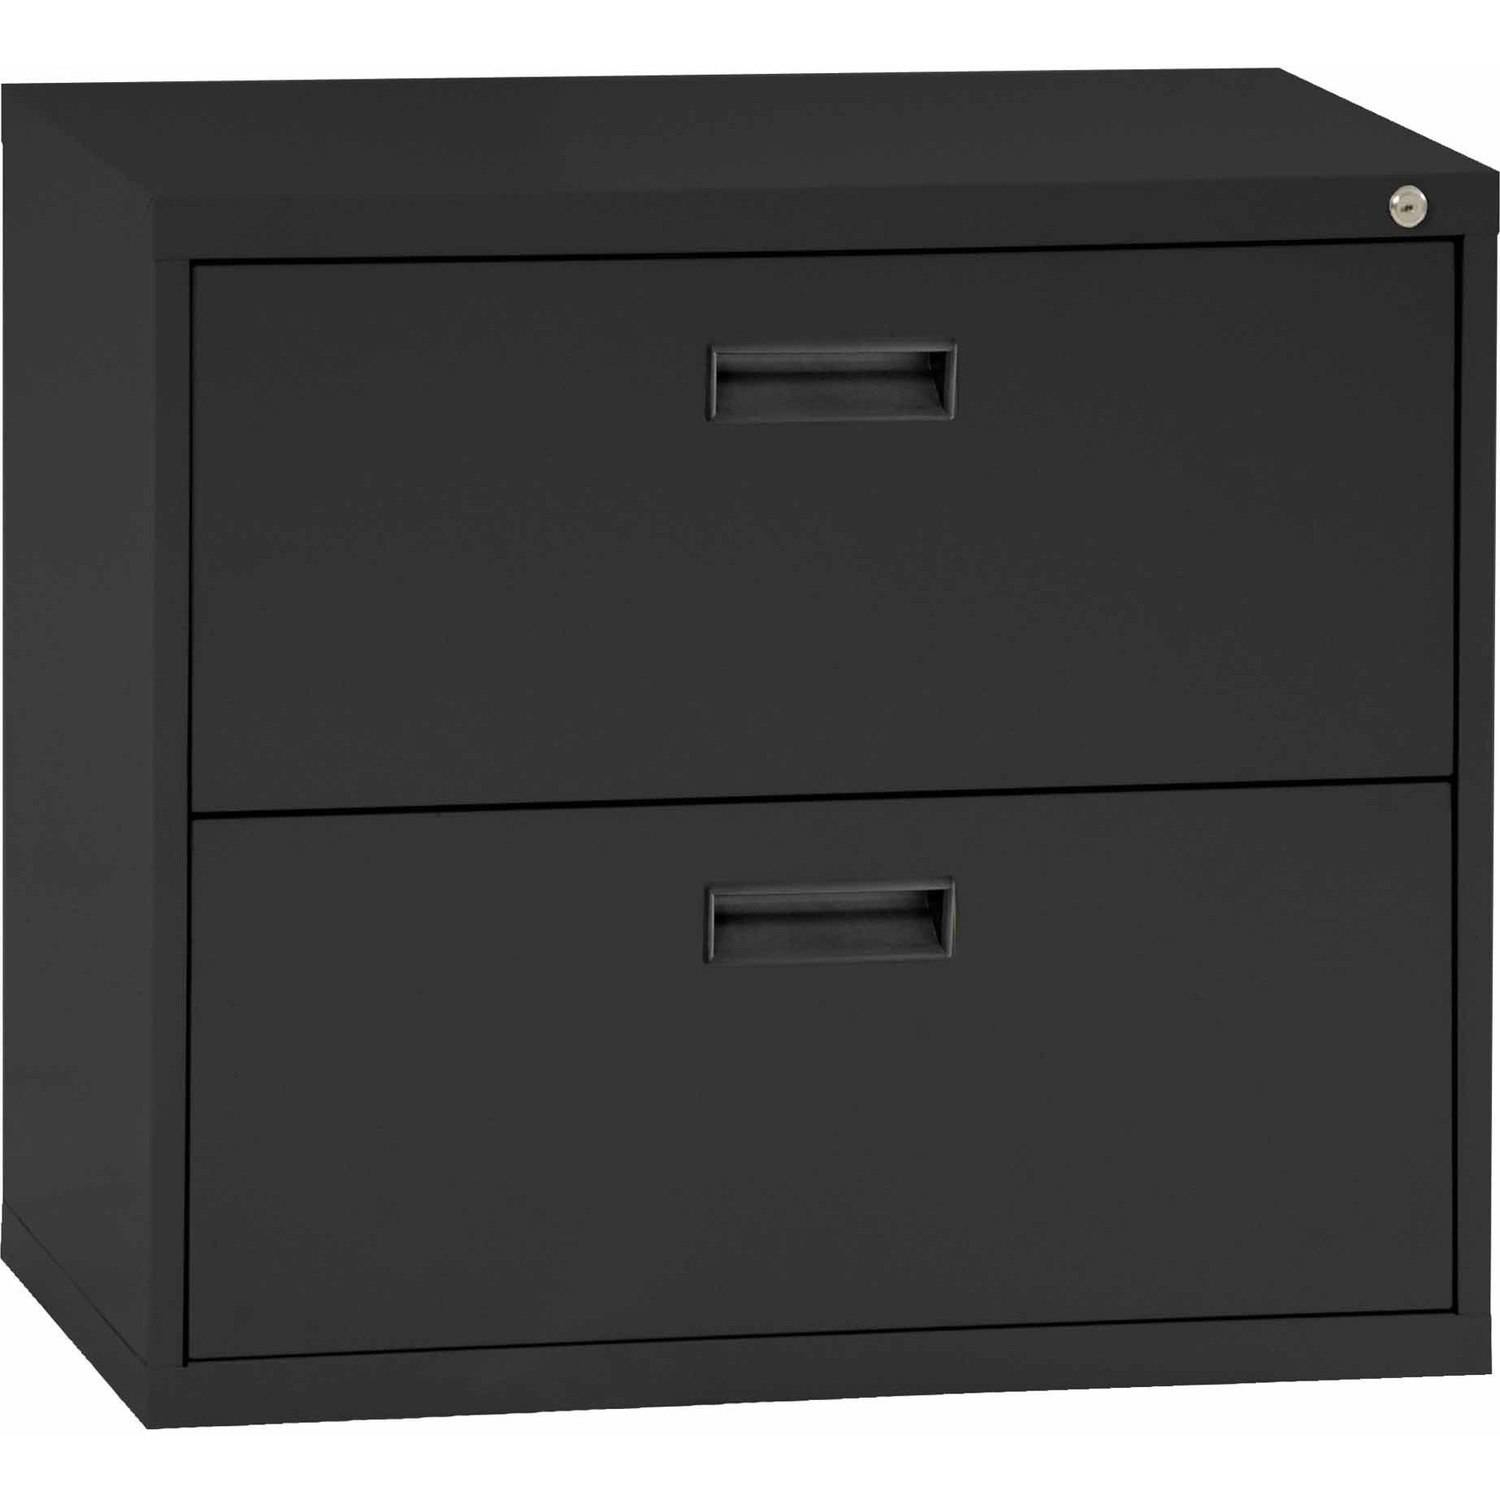 Sandusky Steel Lateral File Cabinet With Plastic Handle 2 Drawers intended for size 1500 X 1500